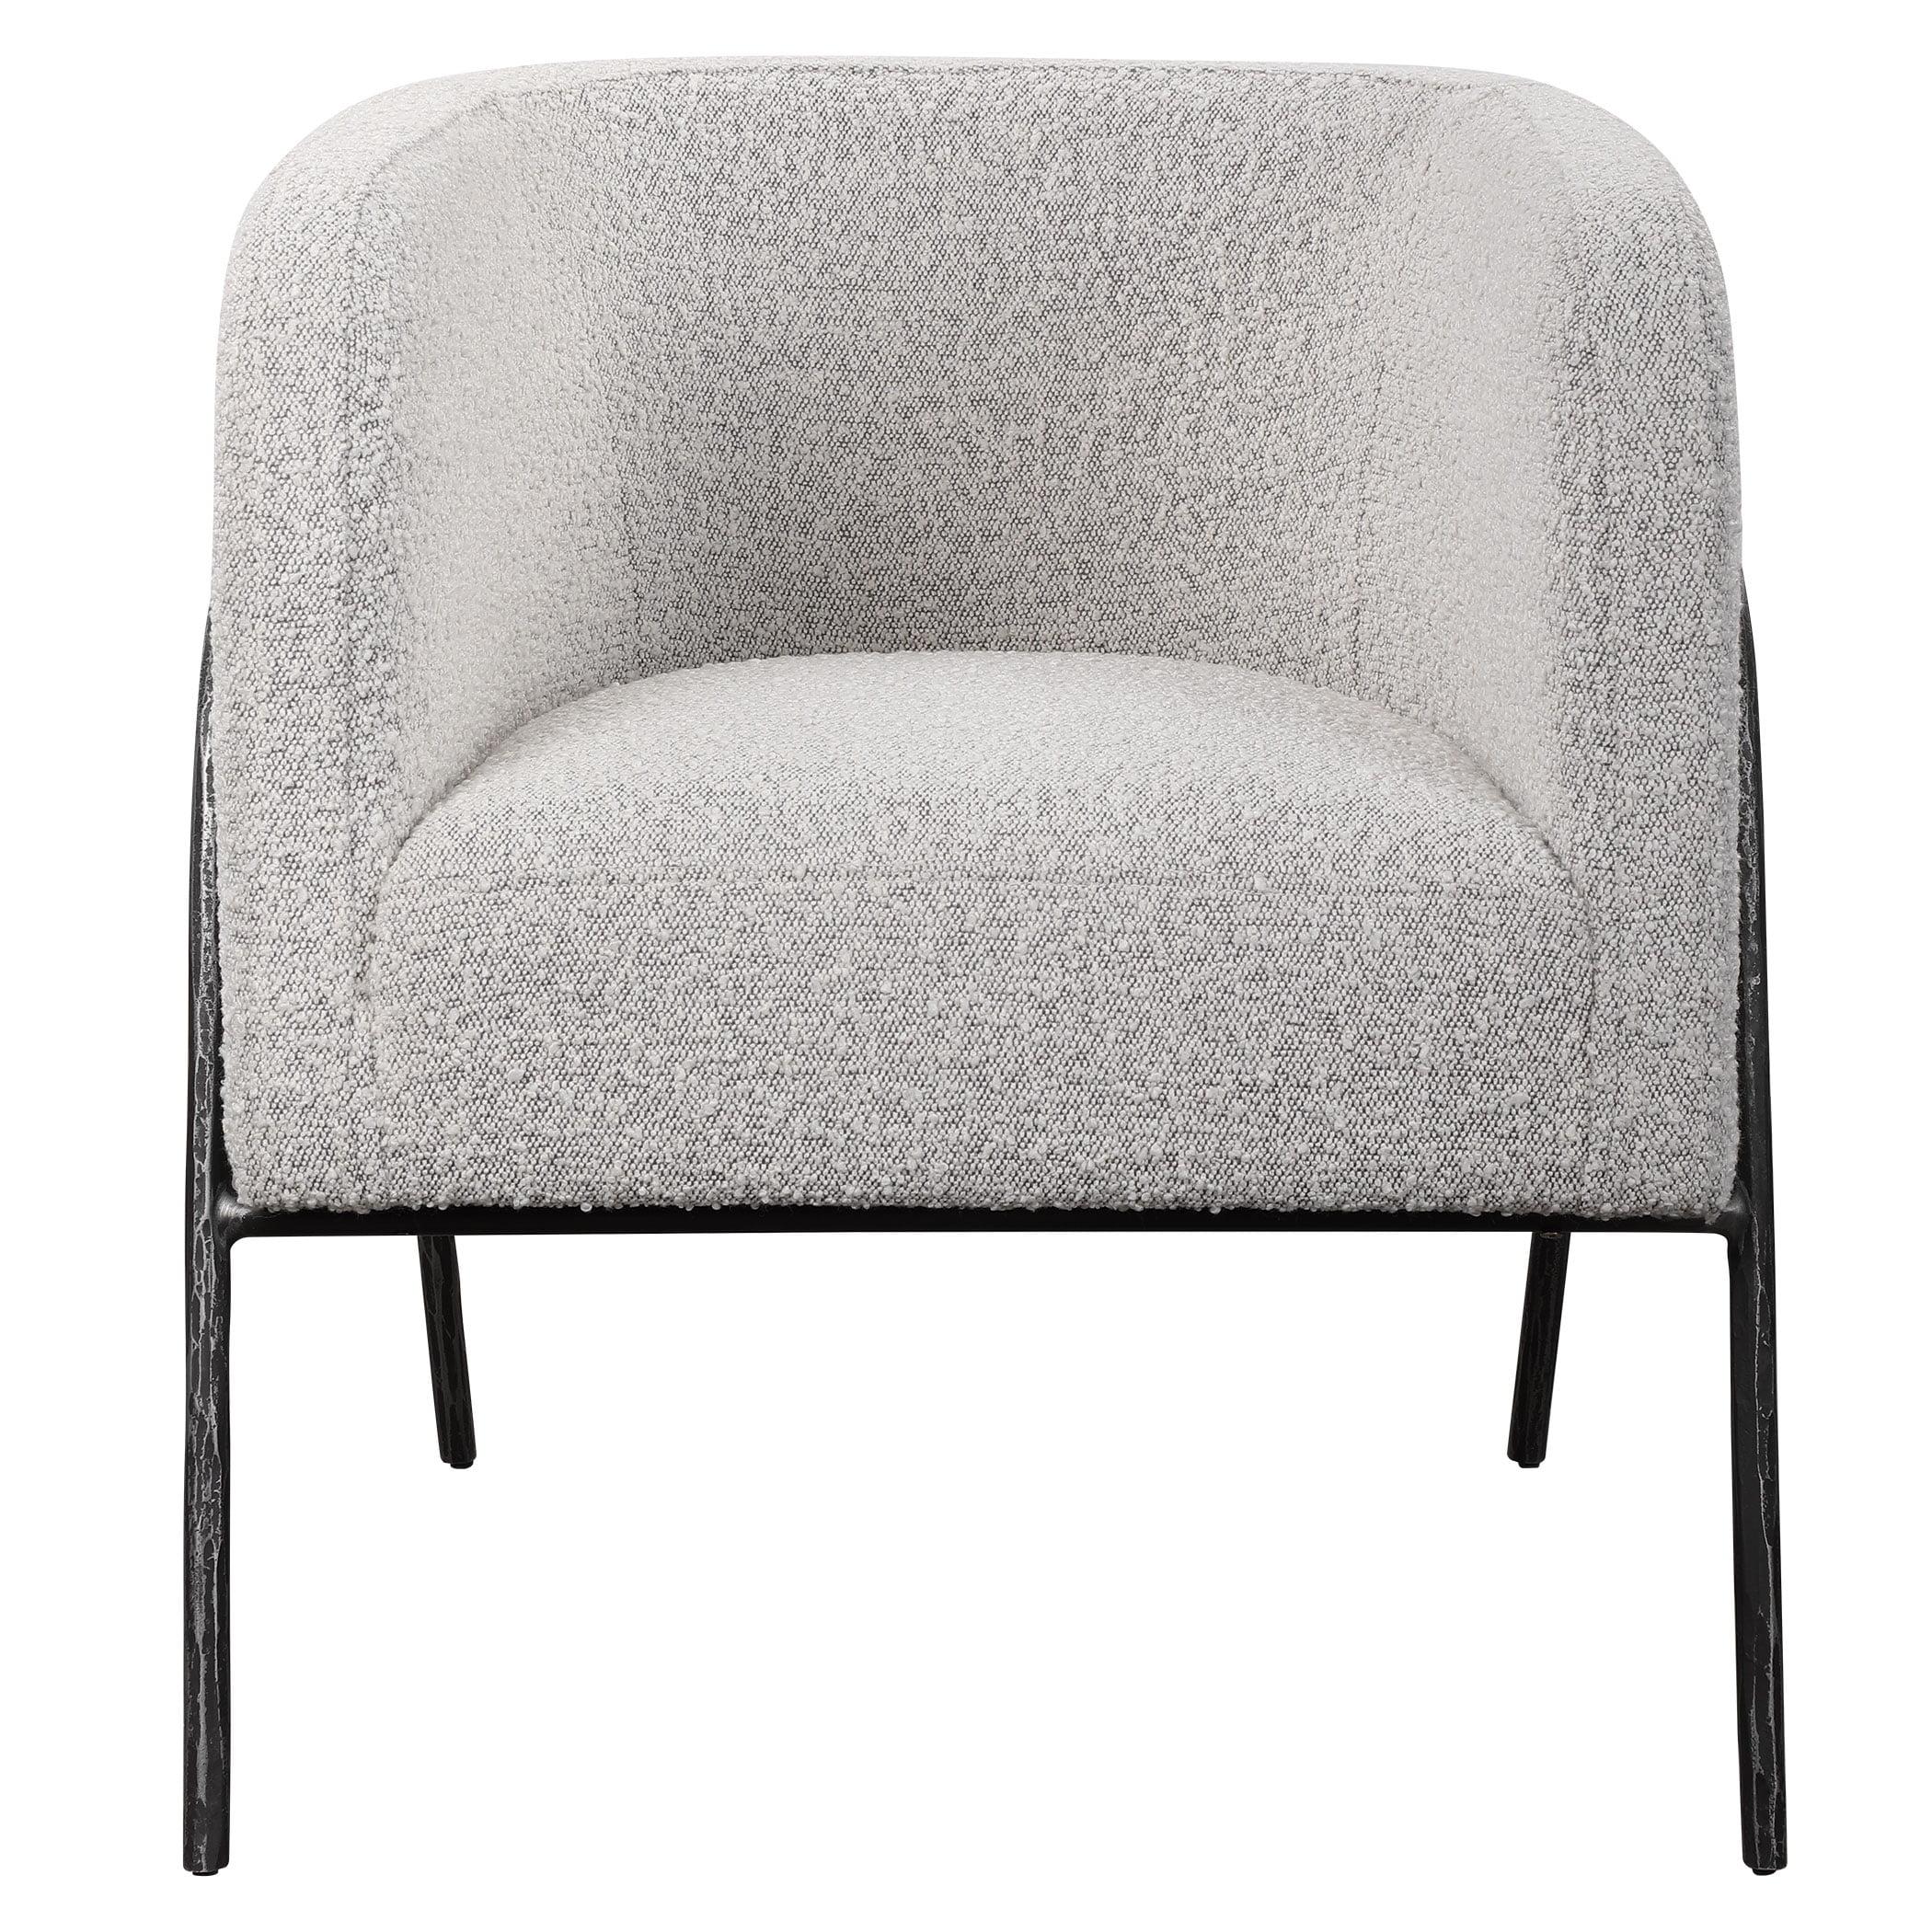 Scandinavian Inspired Gray Barrel Accent Chair with Metal Frame